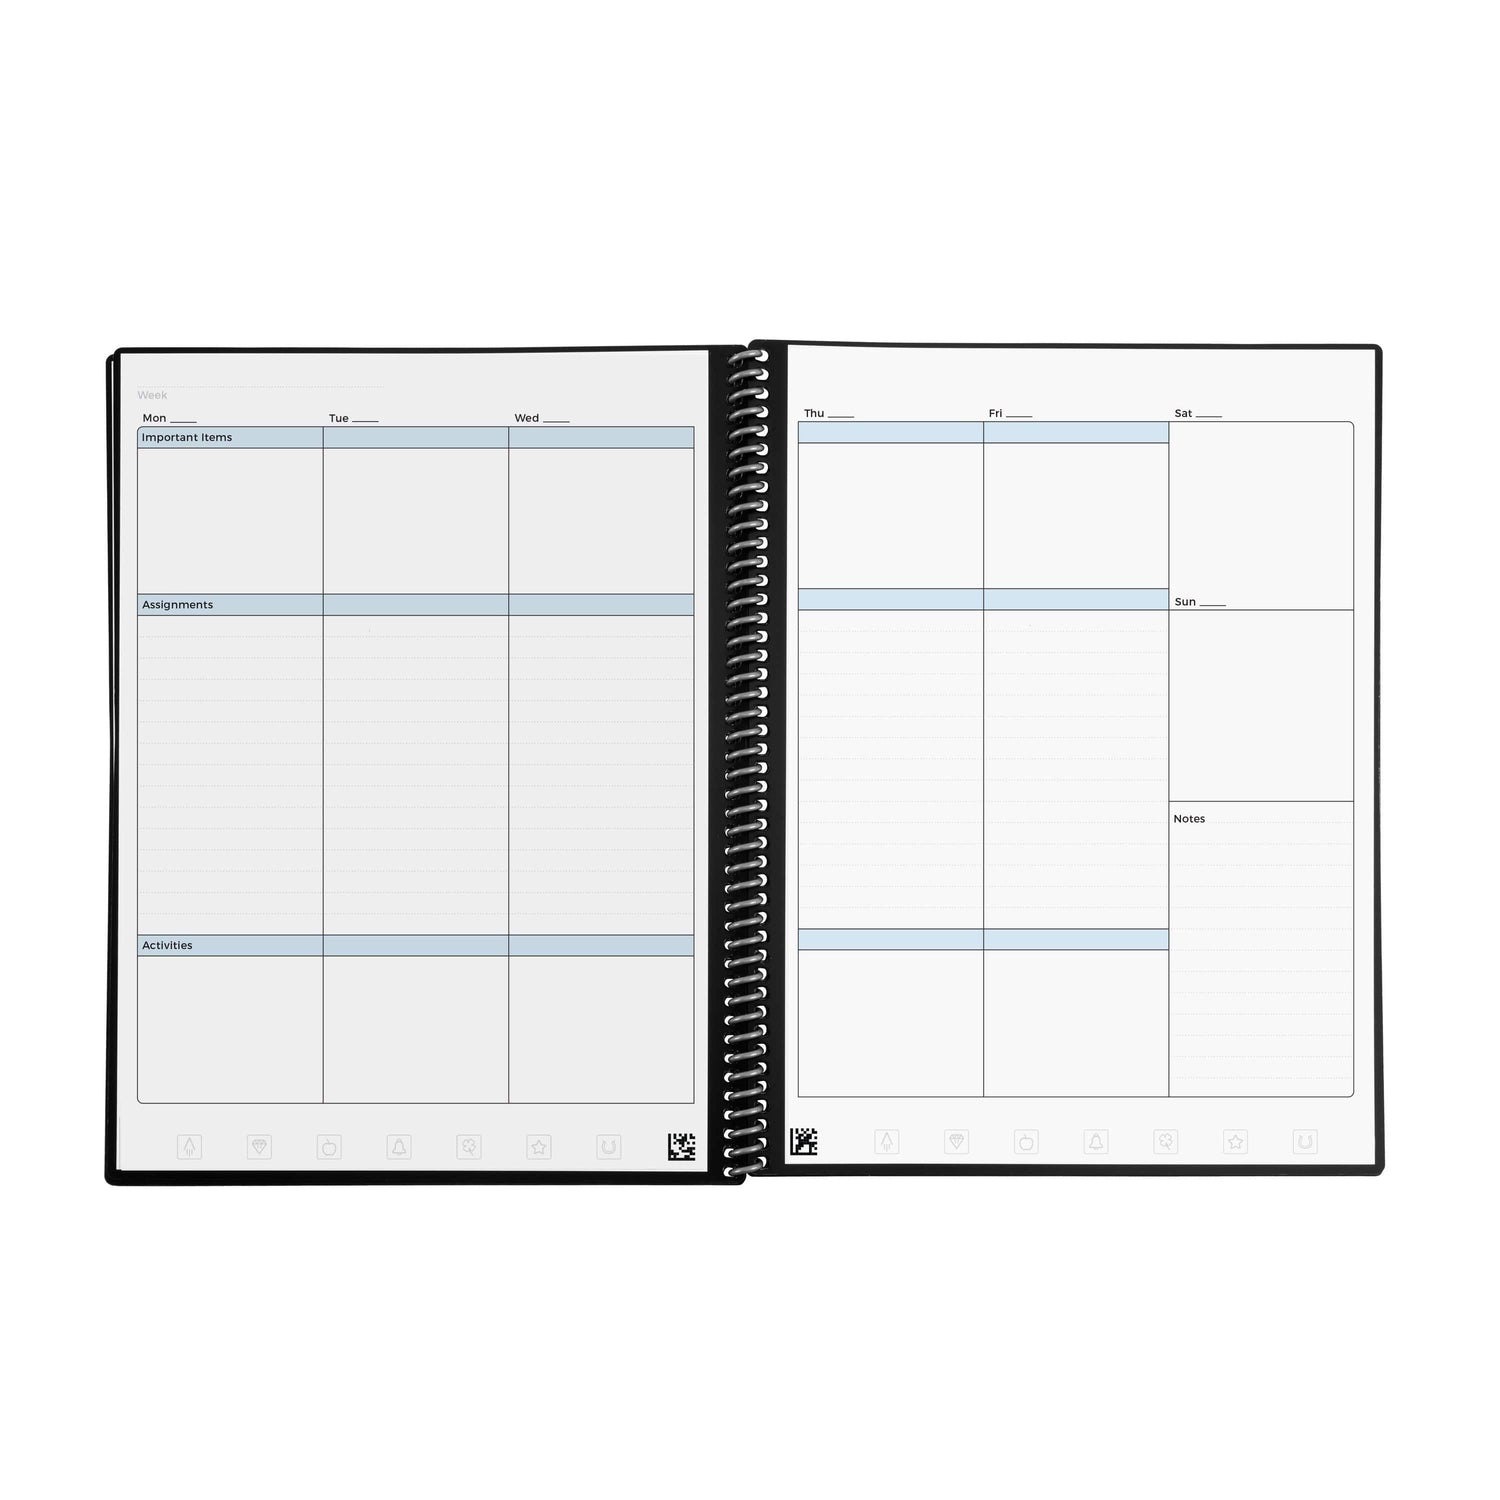 Review: Rocketbook Fusion, the Smart Daily Planner You'll Never